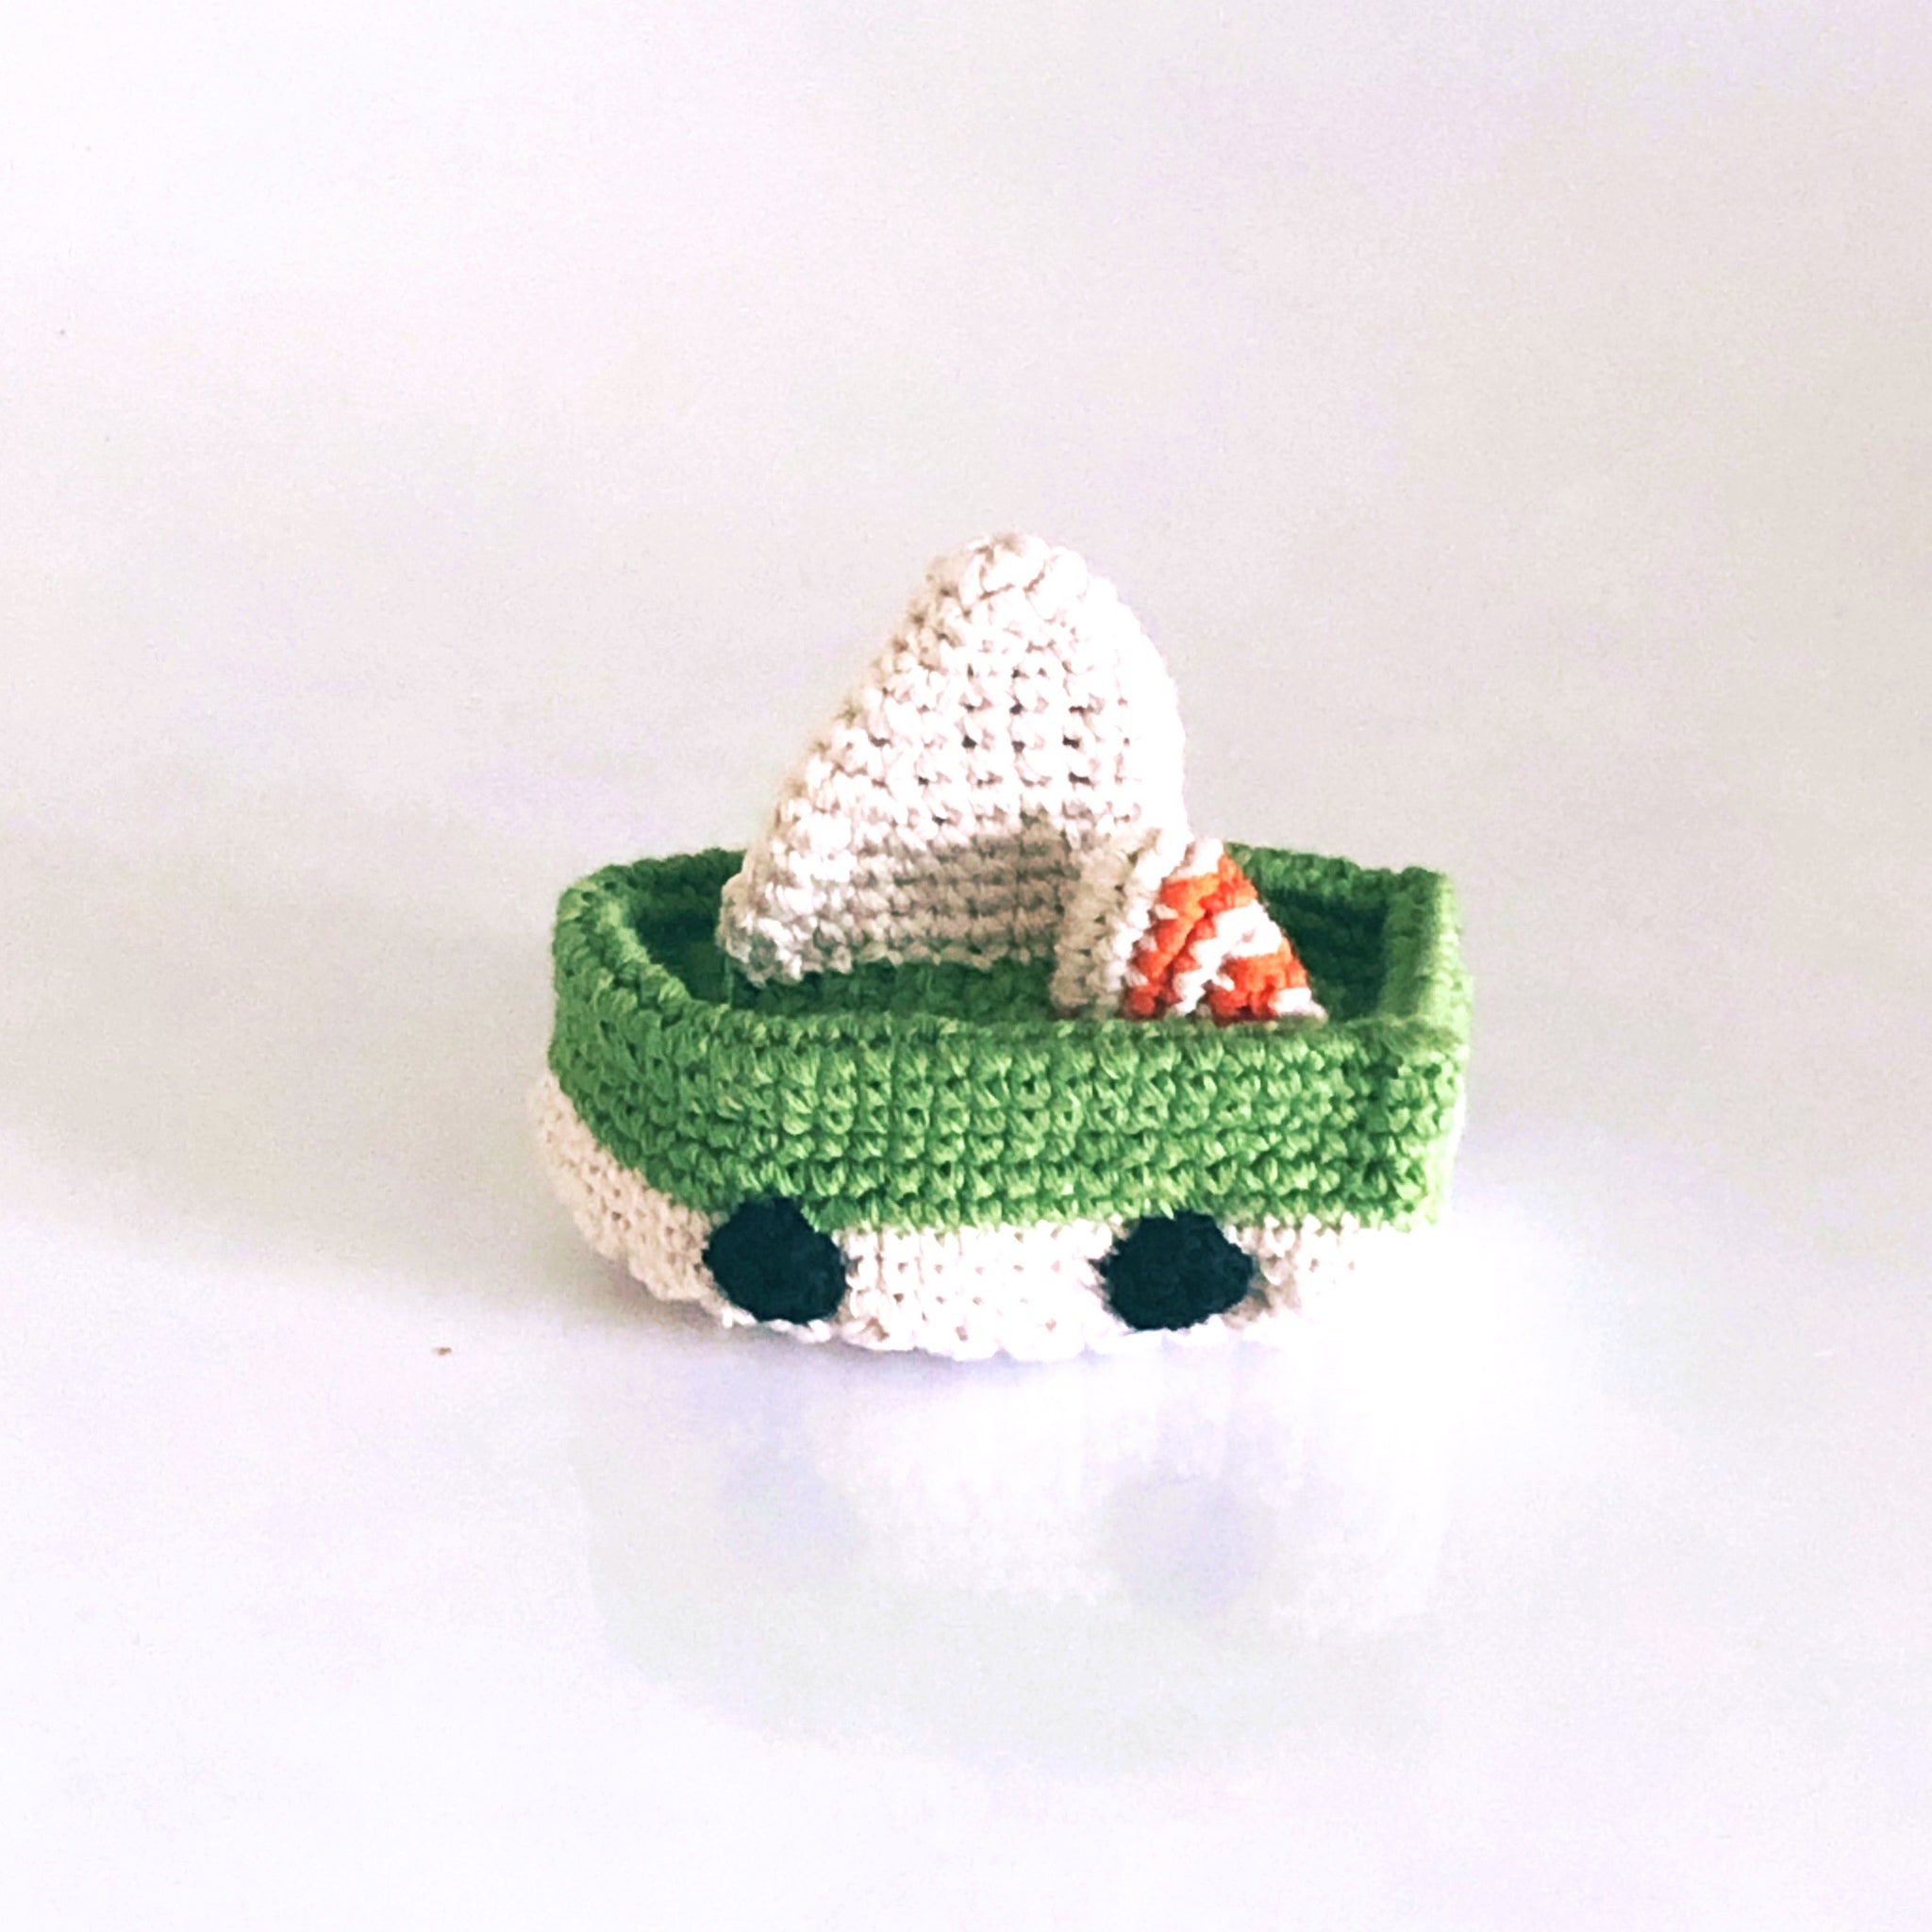 Green and white crochet plush sailboat toy rattle.